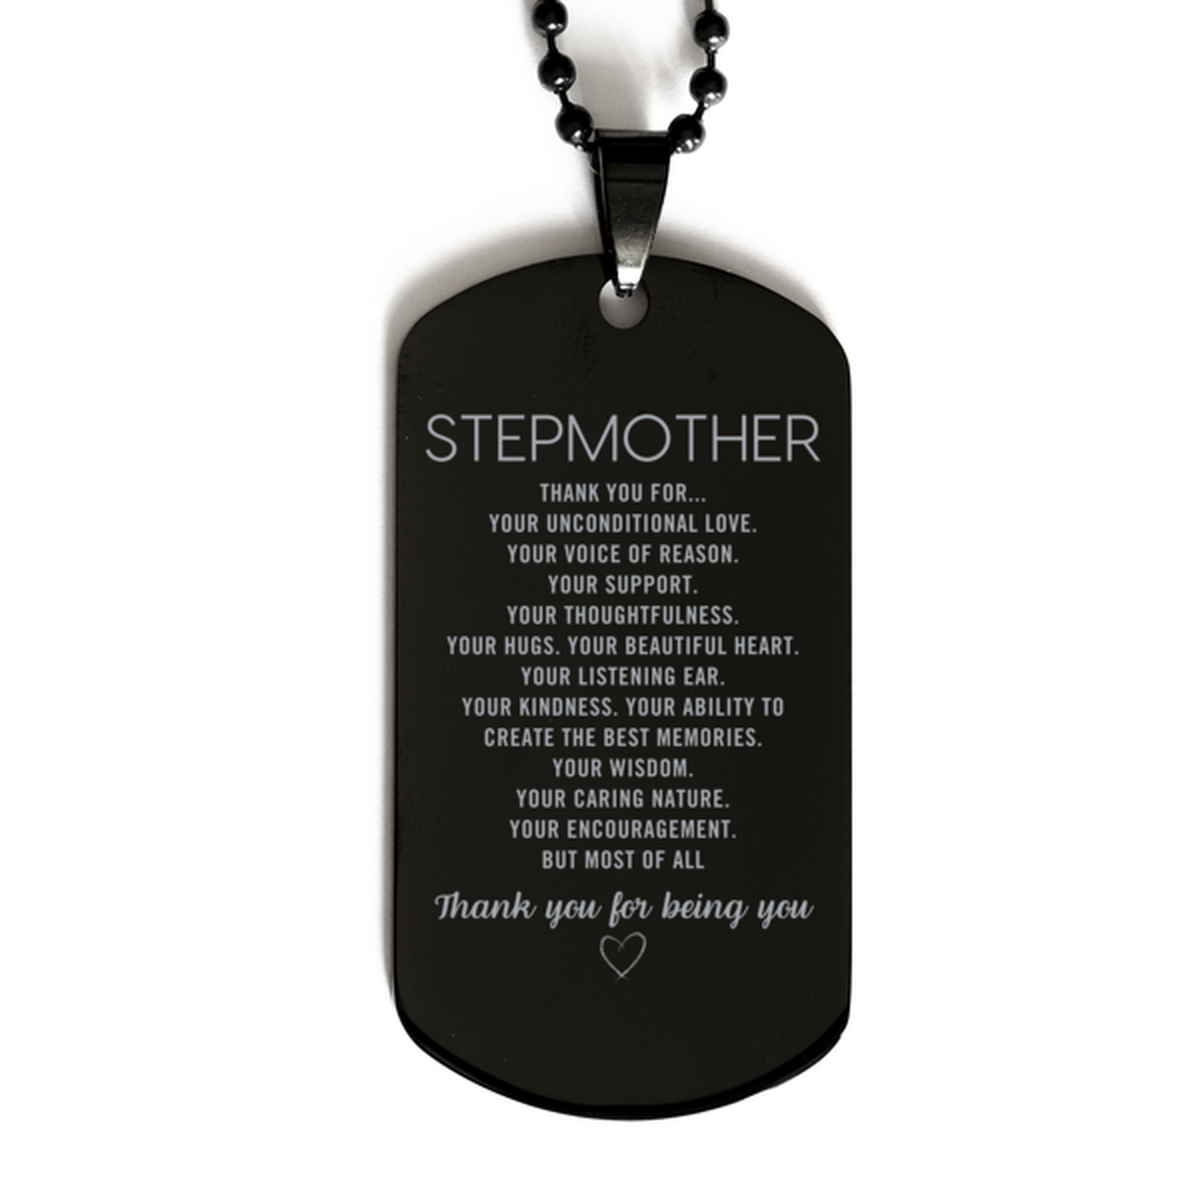 Stepmother Black Dog Tag Custom, Engraved Gifts For Stepmother Christmas Graduation Birthday Gifts for Men Women Stepmother Thank you for Your unconditional love